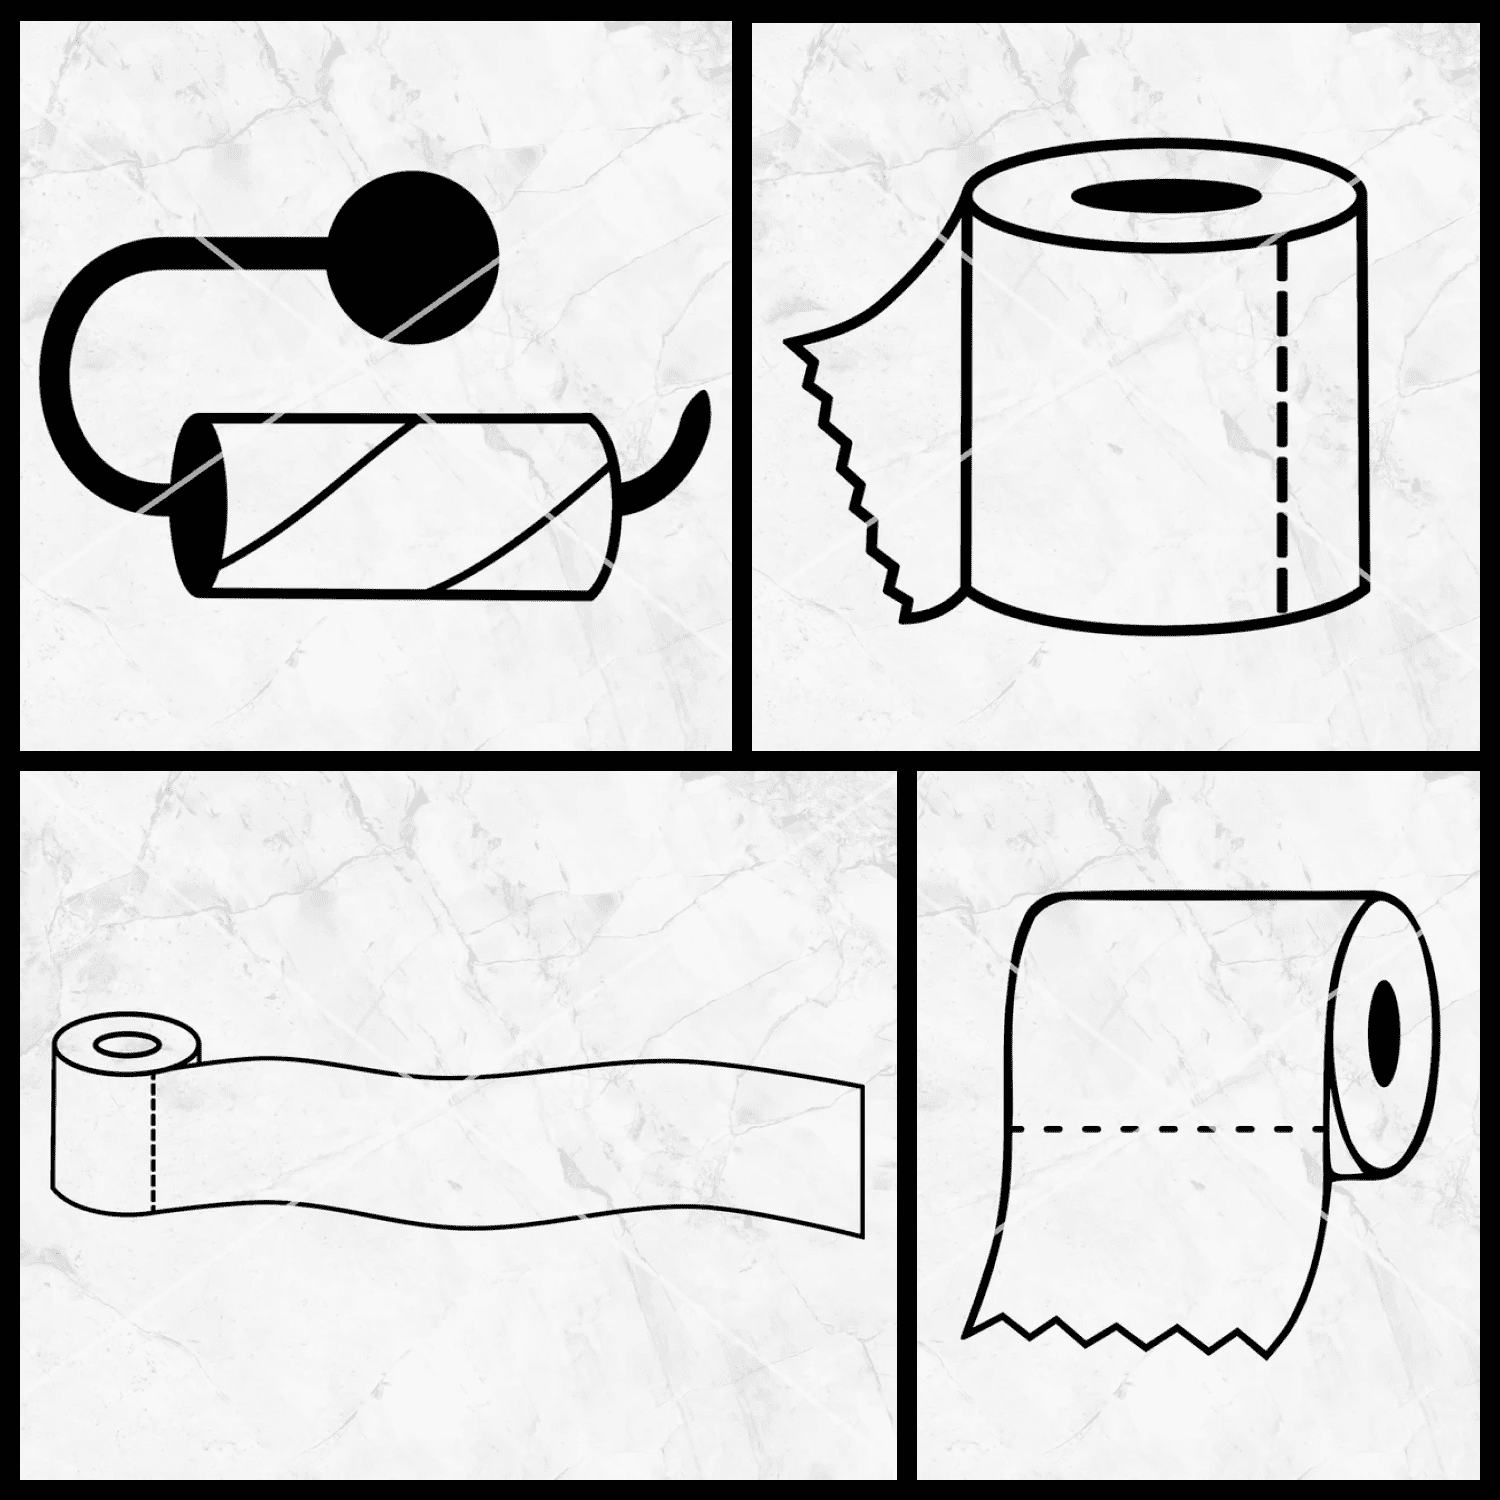 Loo / toilet roll bundle cover.